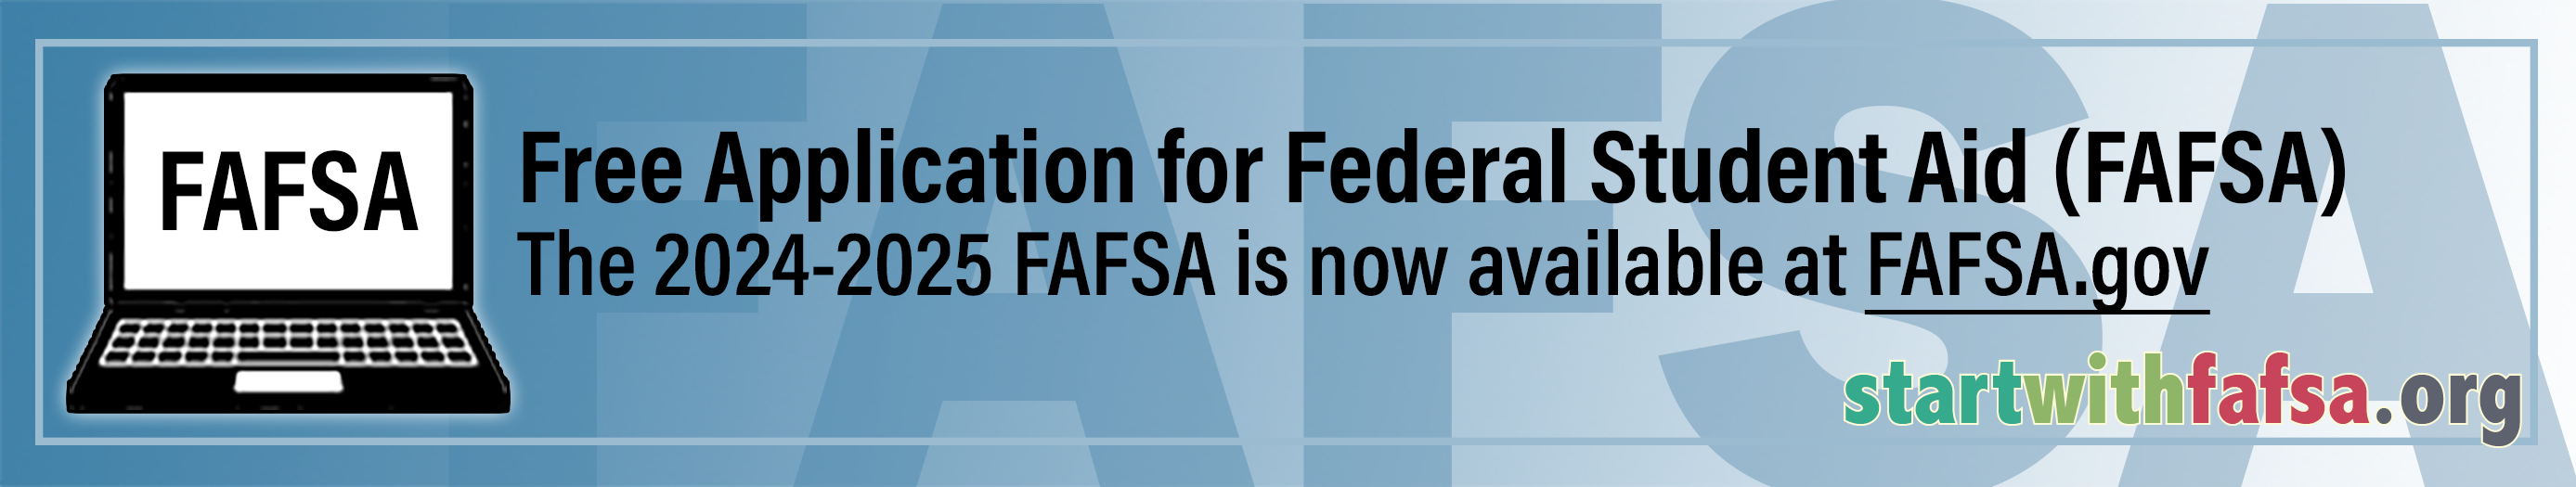 StartWithFAFSA.org opens in a new tab